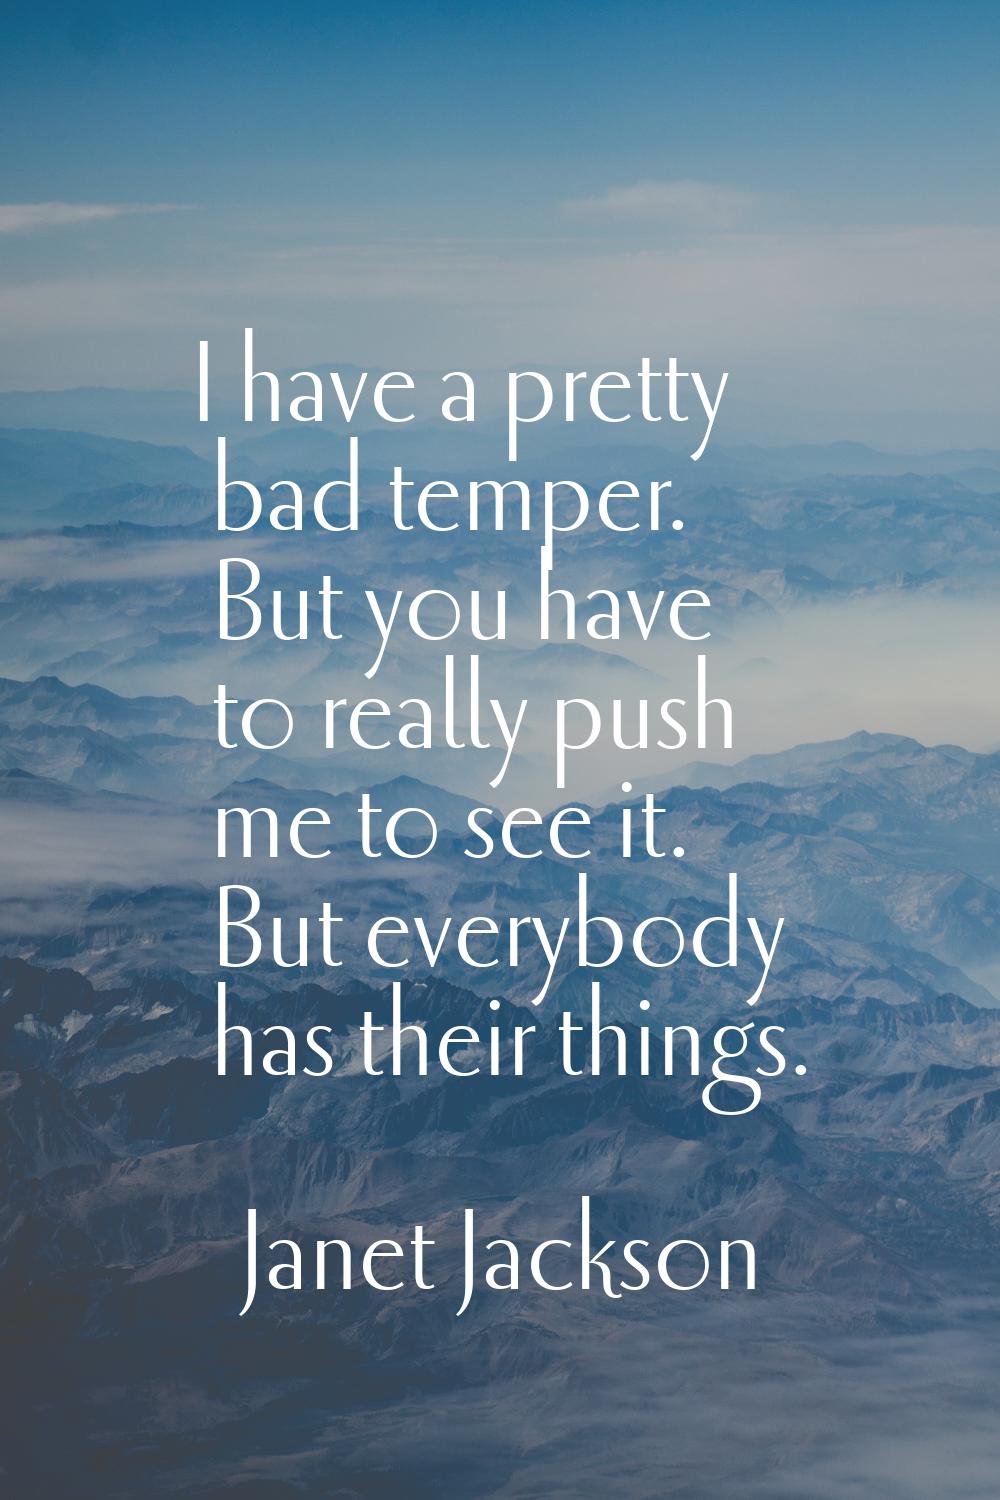 I have a pretty bad temper. But you have to really push me to see it. But everybody has their thing